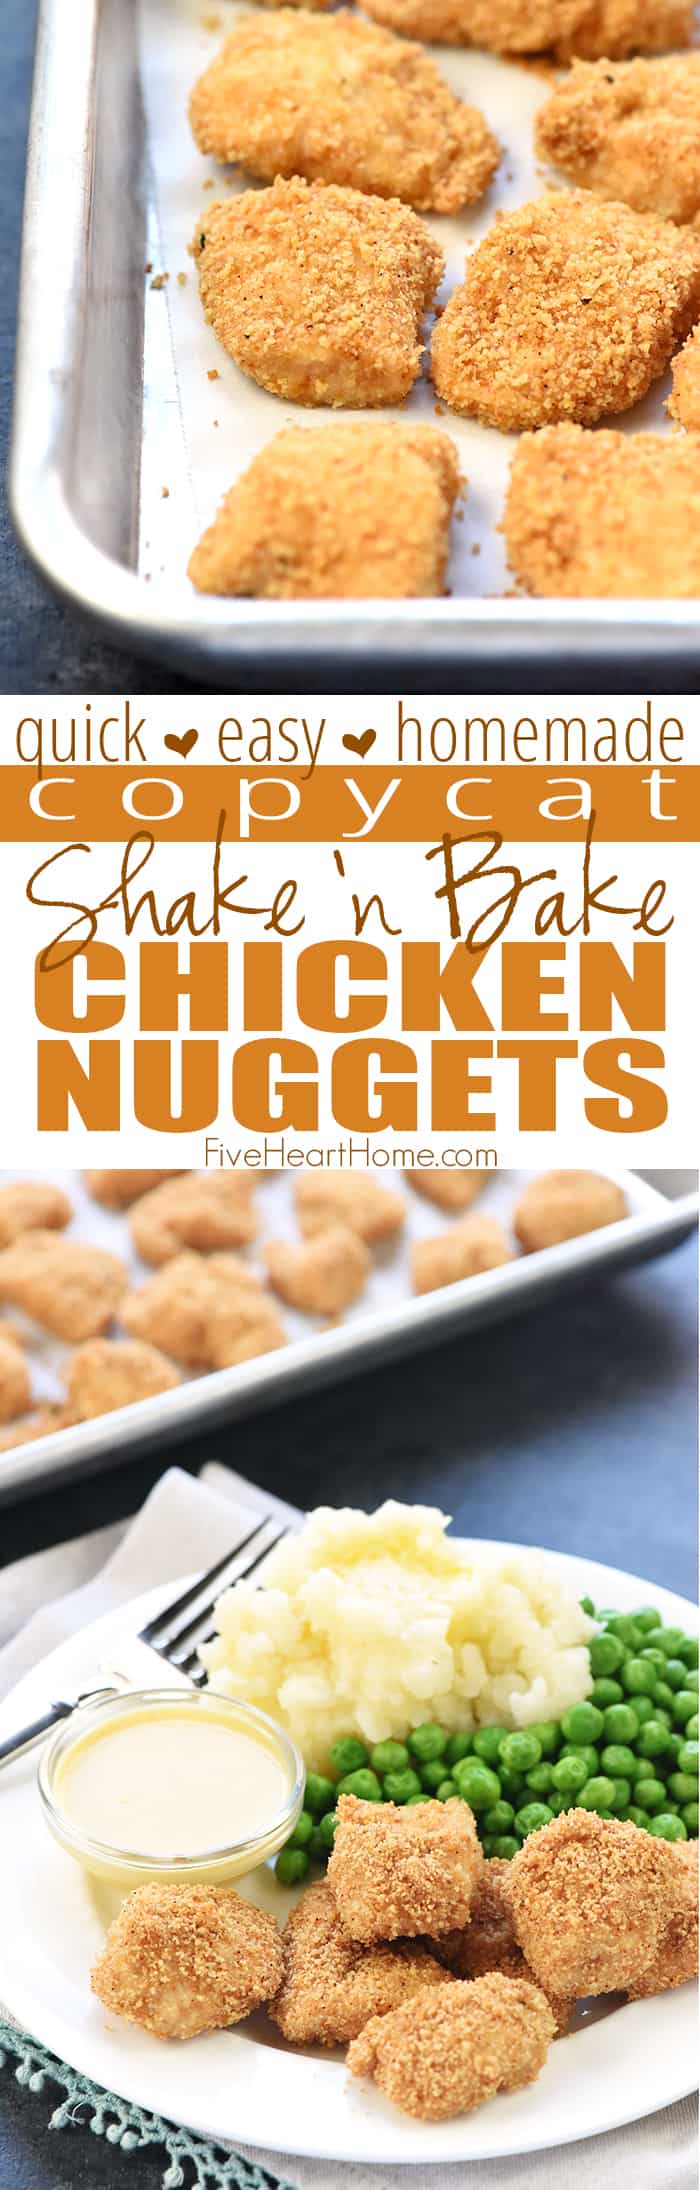 Homemade Chicken Nuggets ~ this recipe is made the QUICK AND EASY way, with a copycat "shake and bake" method yielding effortless, tasty nuggets that are a hit with kids and adults alike! | FiveHeartHome.com via @fivehearthome